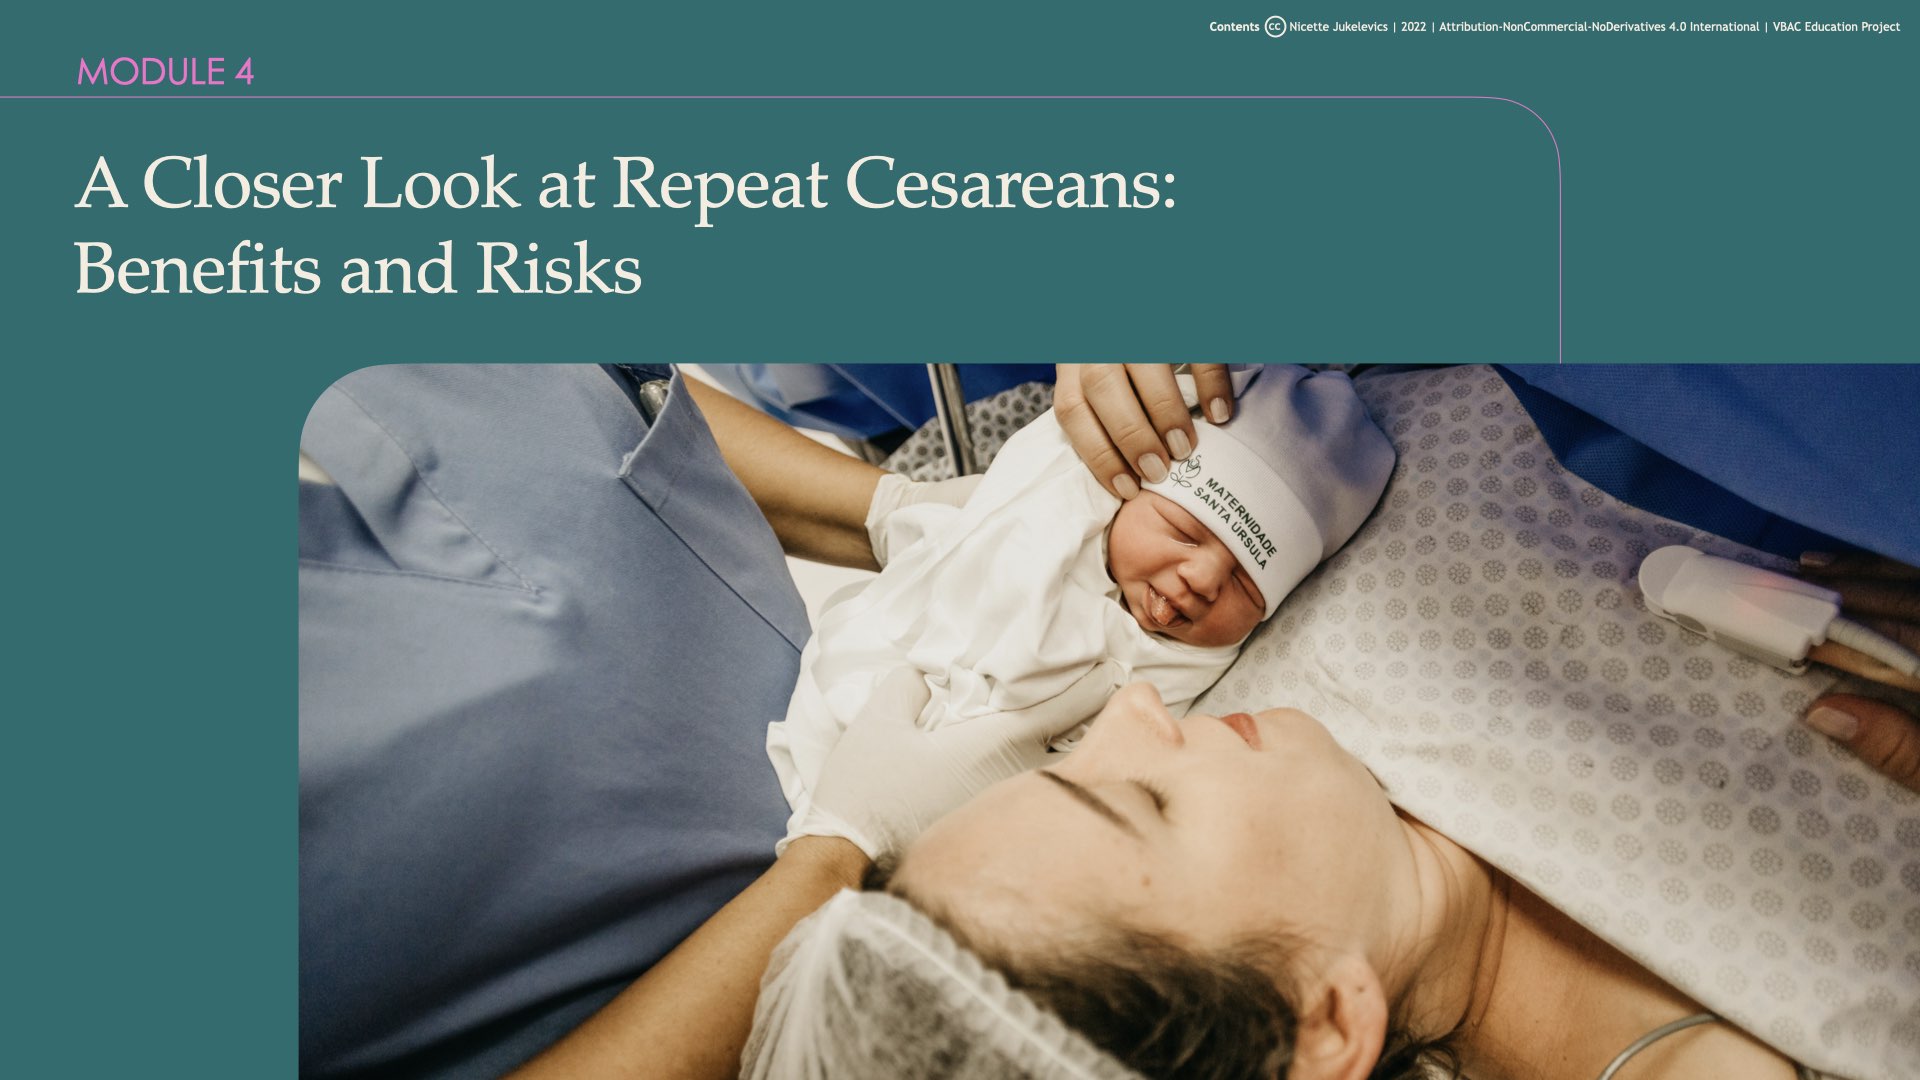 Module 4: A Closer Look at Repeat Cesareans: Benefits and Risks